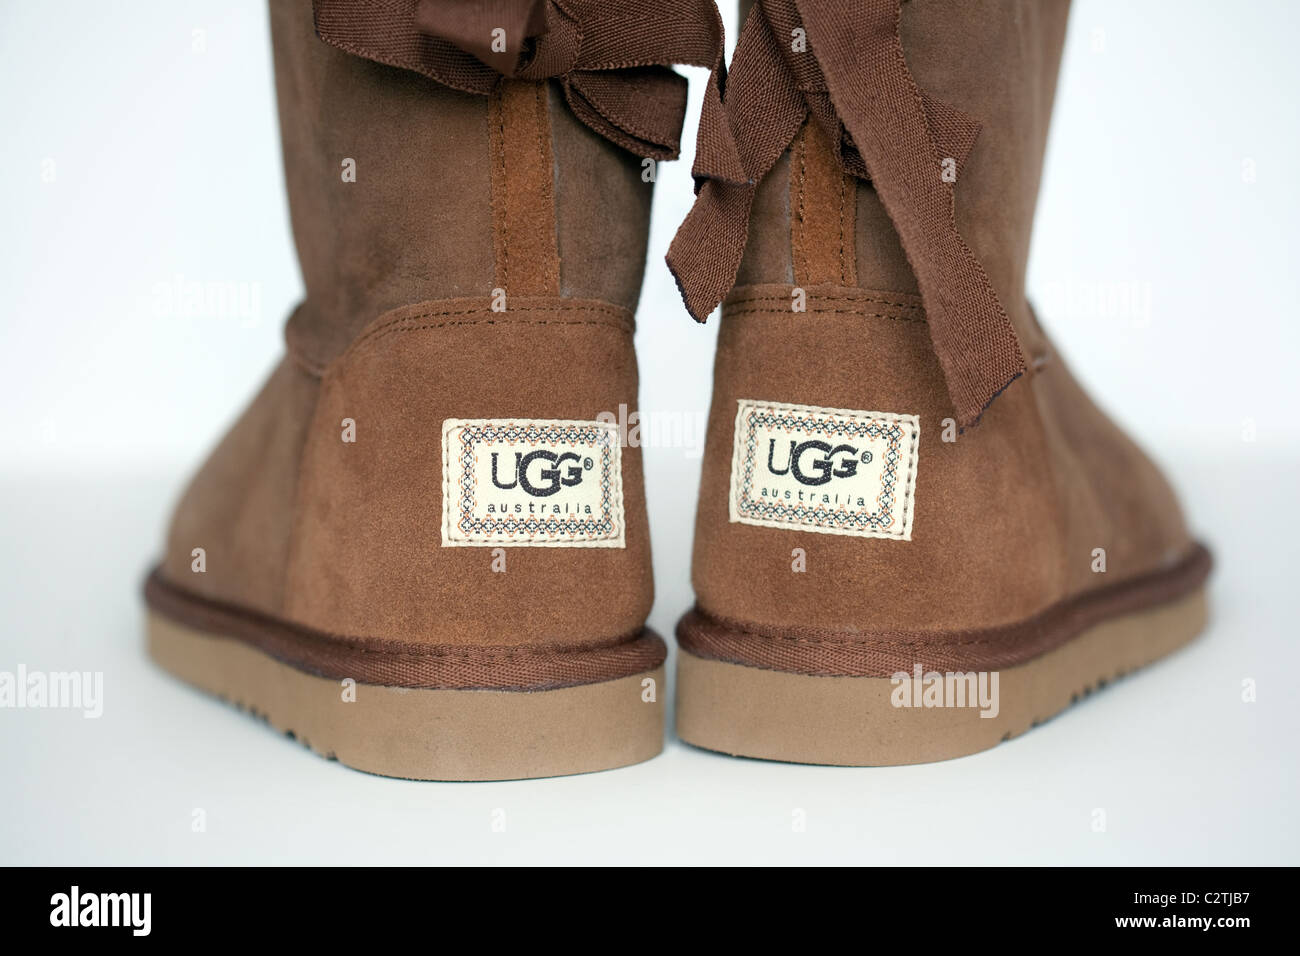 A pair of counterfeit Ugg boots made in 